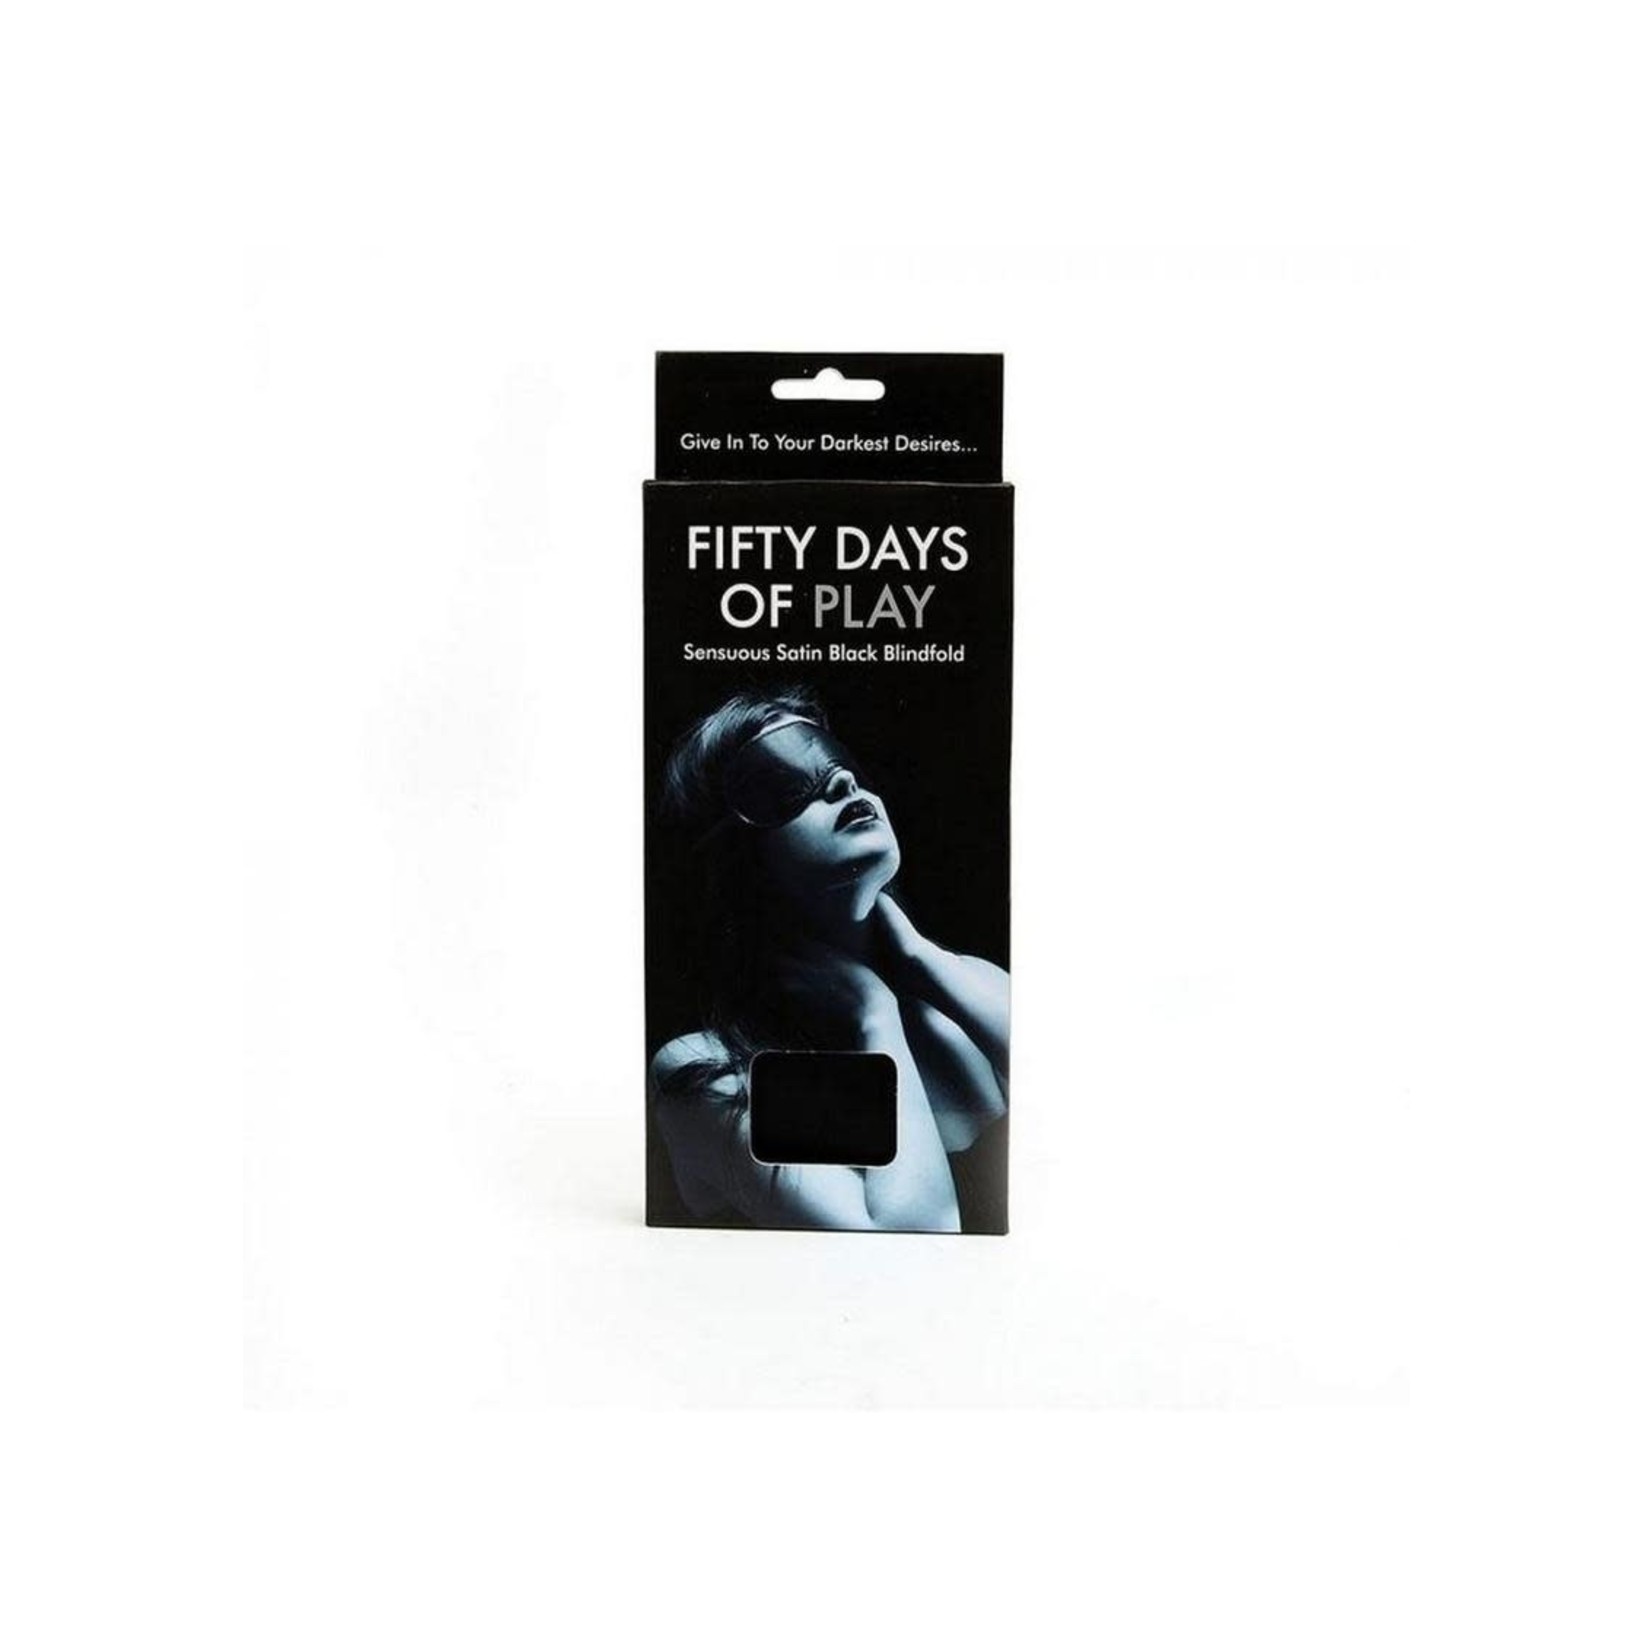 Fifty Days of Play - Bondage Bundle Collection